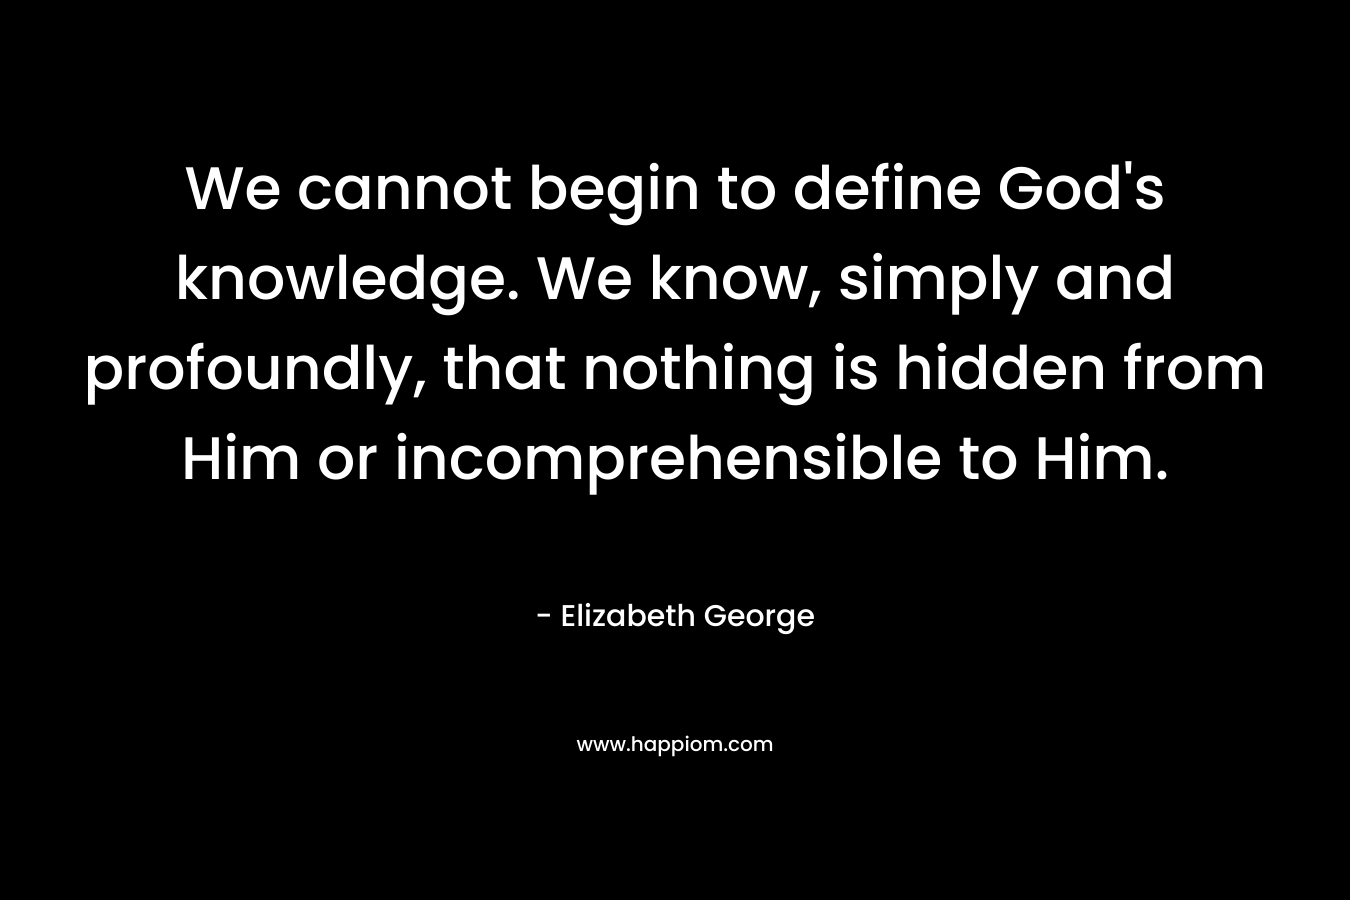 We cannot begin to define God's knowledge. We know, simply and profoundly, that nothing is hidden from Him or incomprehensible to Him.